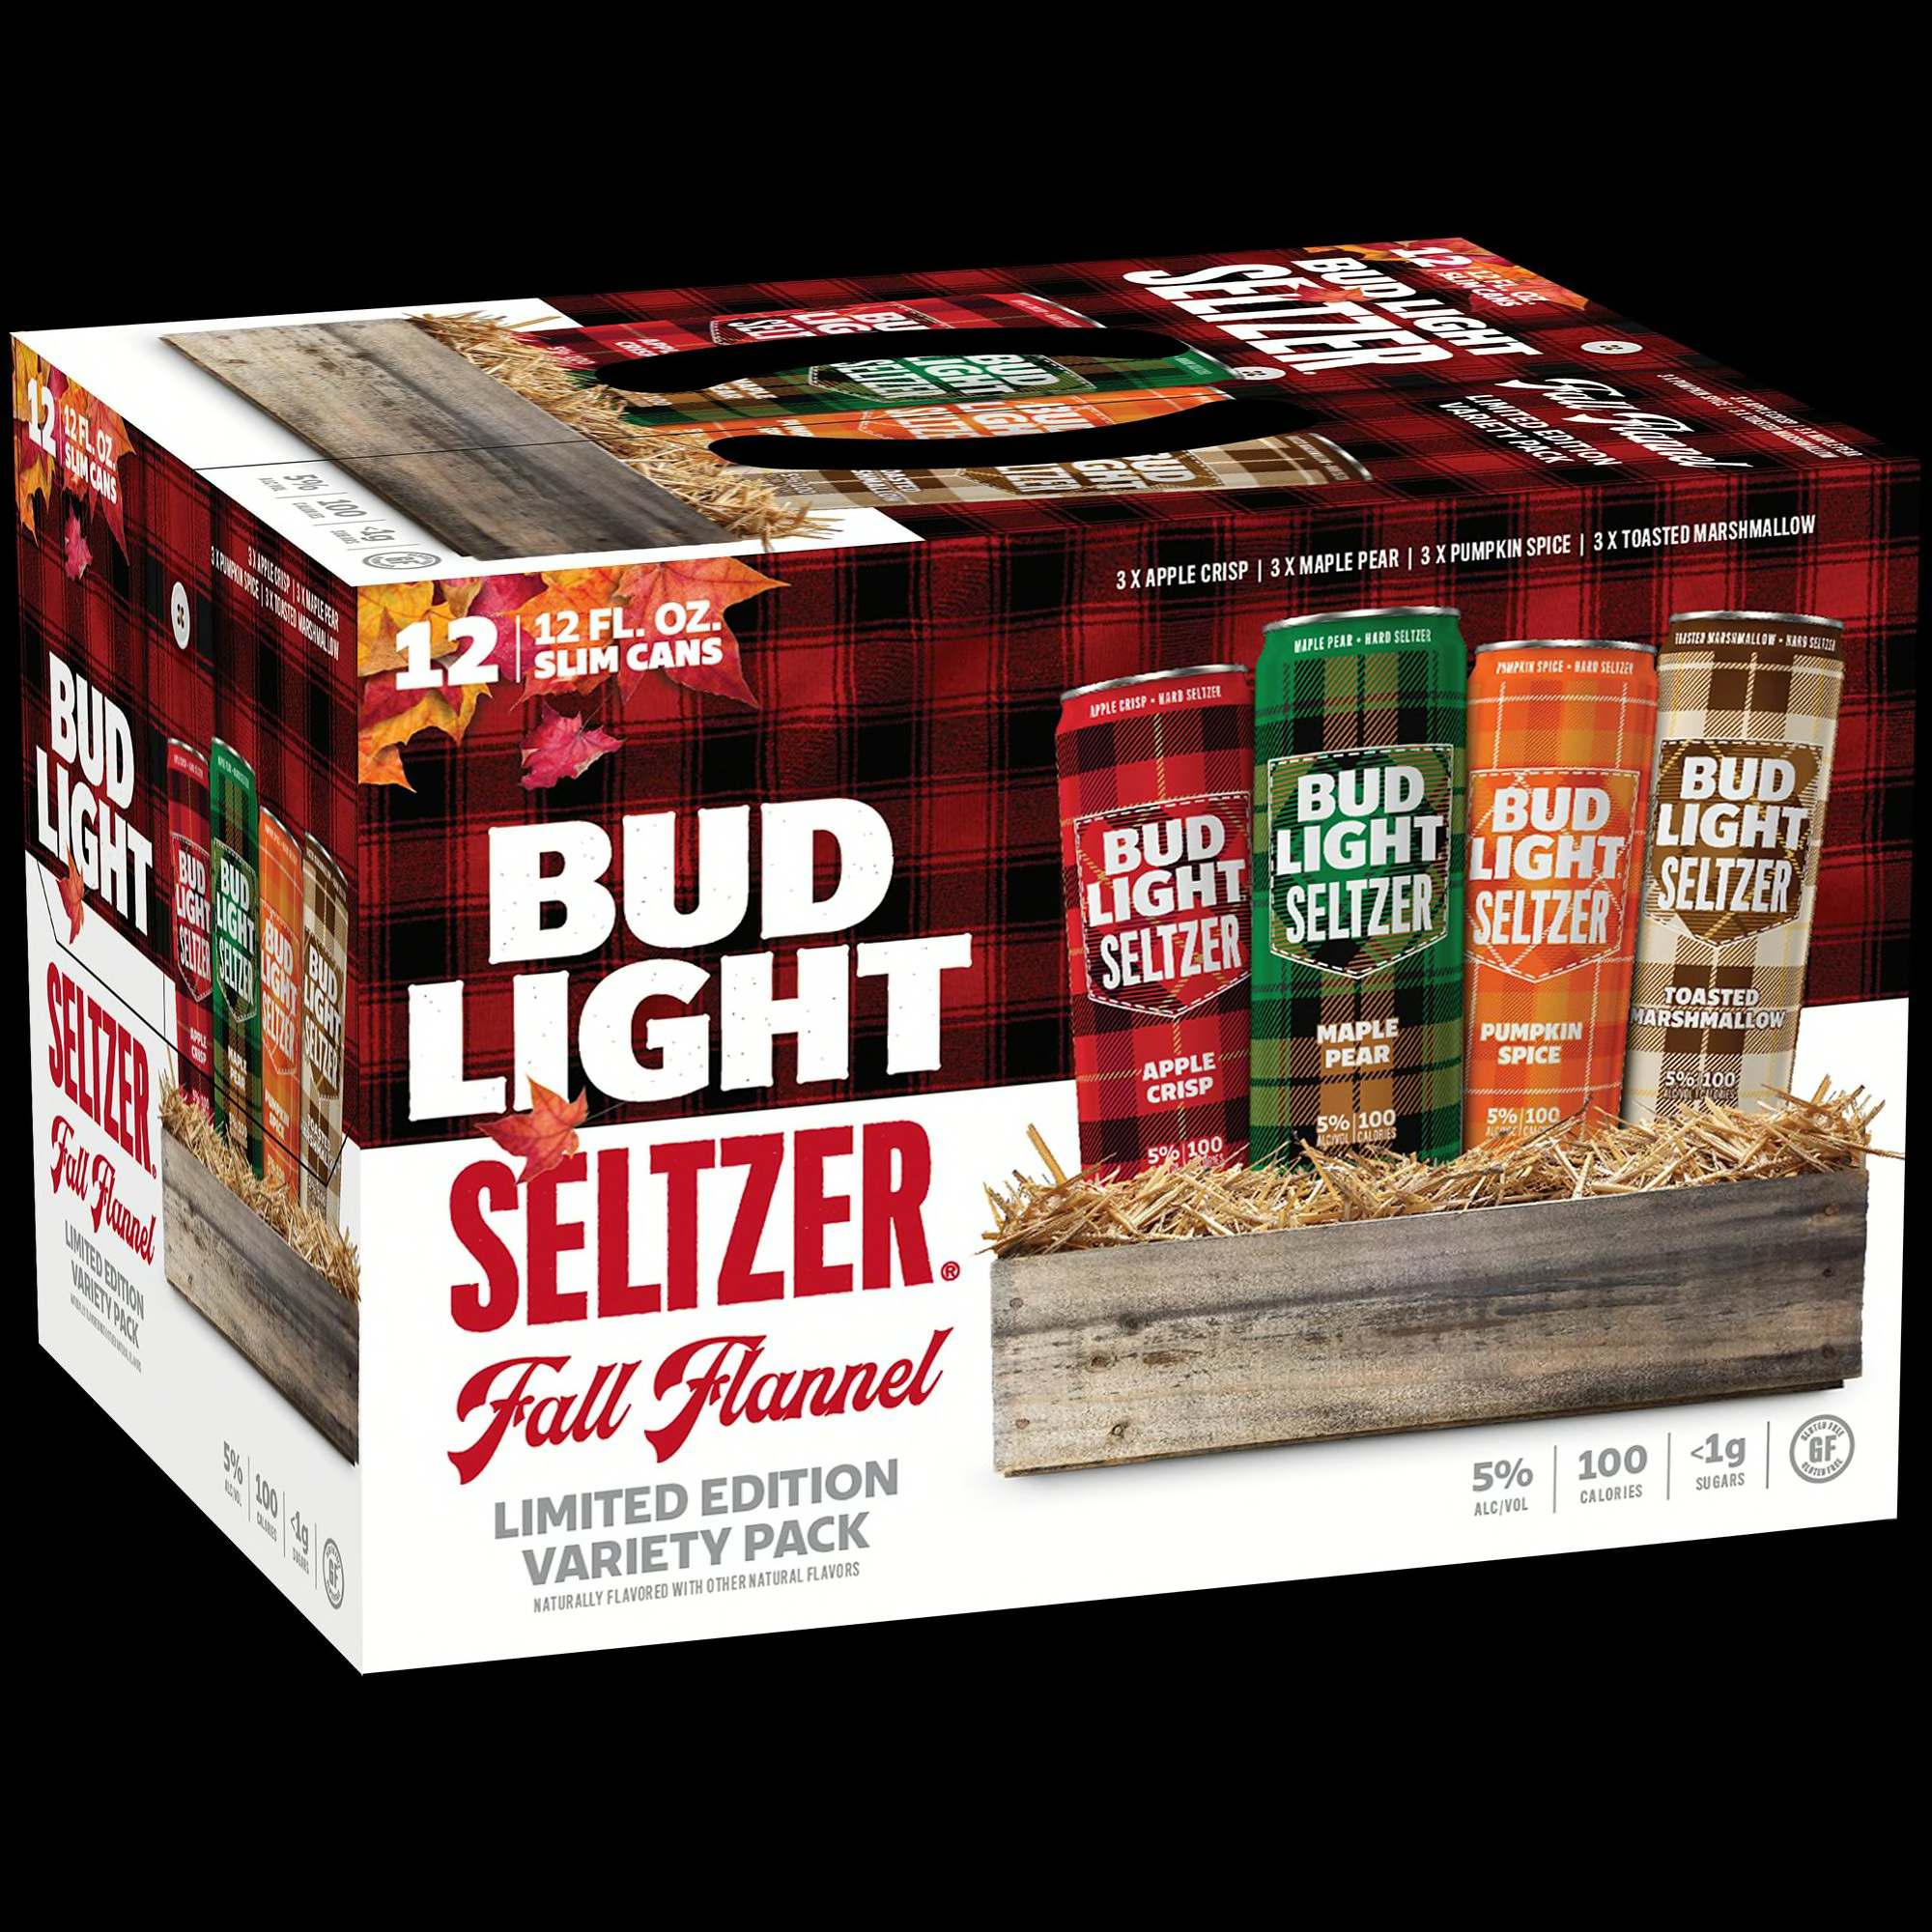 Bud Light Seltzer Fall Flannel Variety pack is spicing up fall cocktail